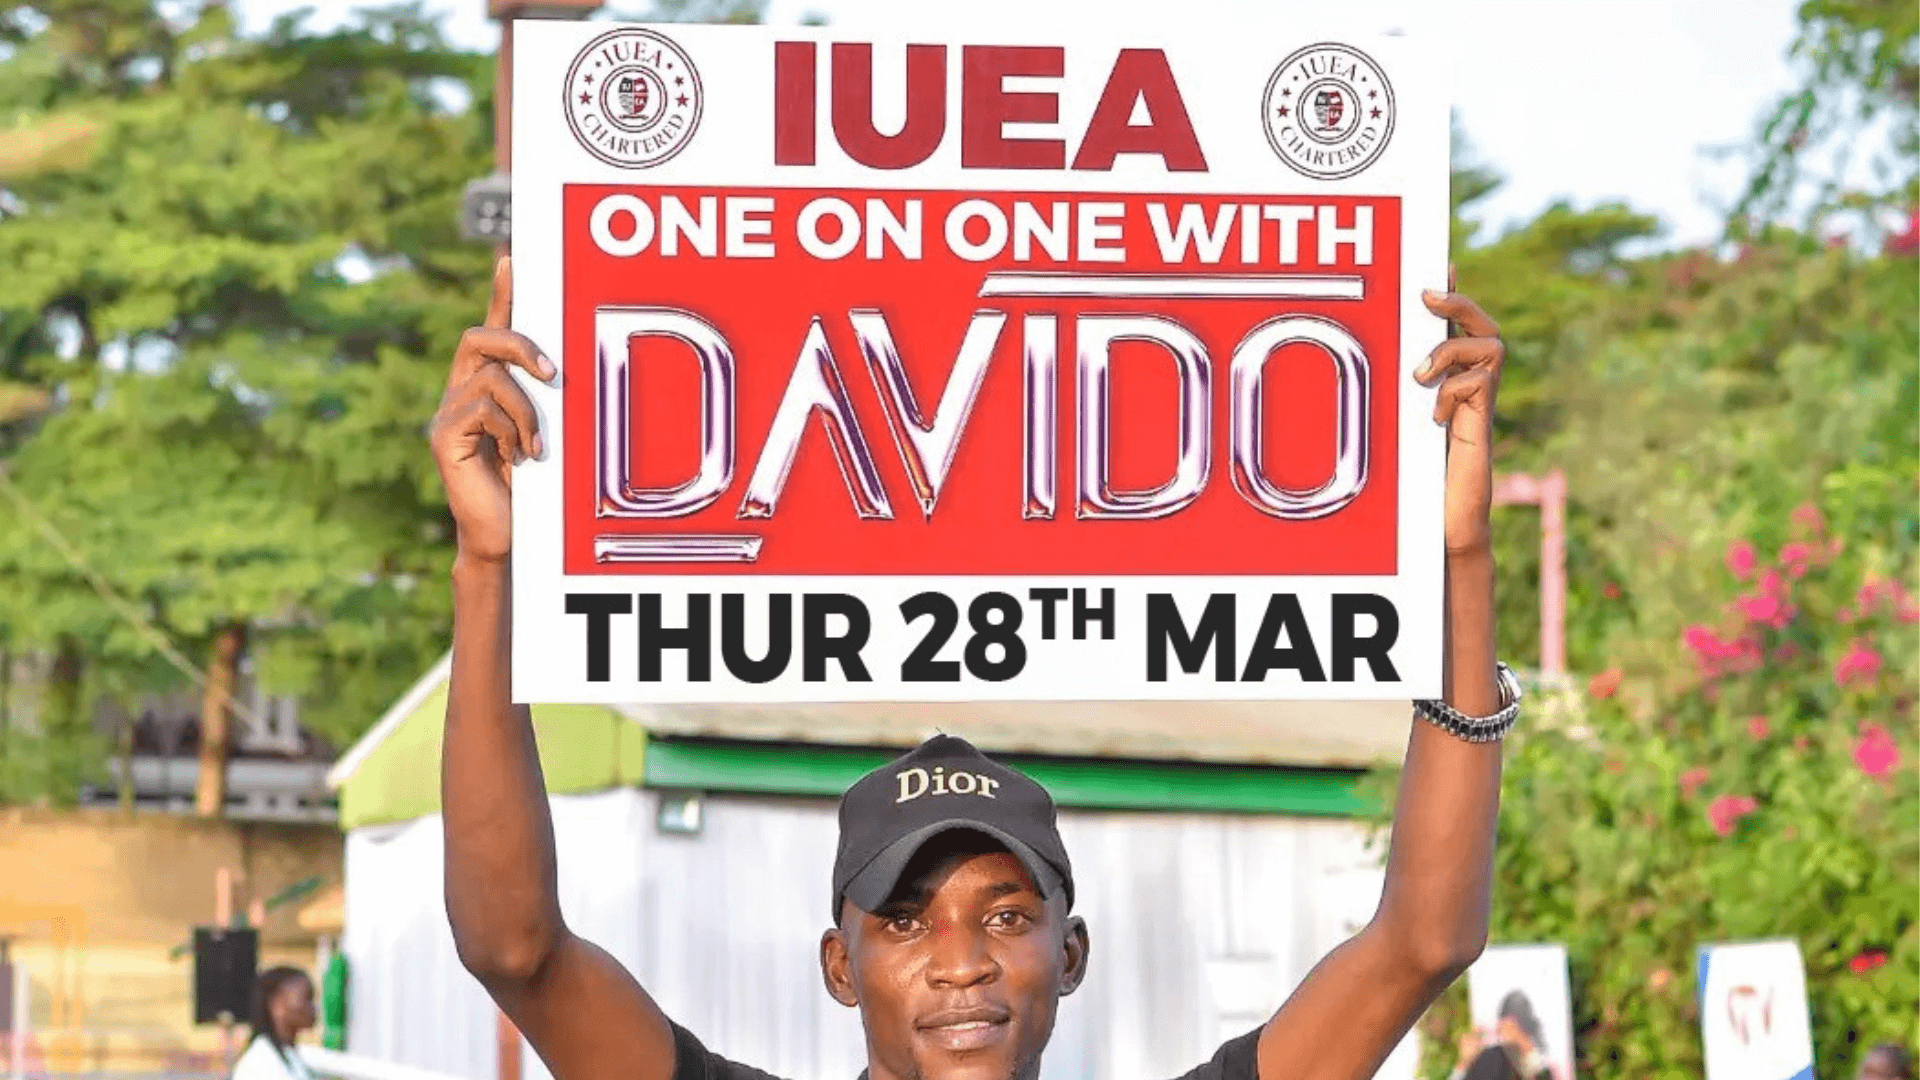 With excitement, IUEA staff member Ssali Gerald shares details about Davido’s exclusive press conference at IUEA, slated for March 28, 2024, through a vibrant placard display.